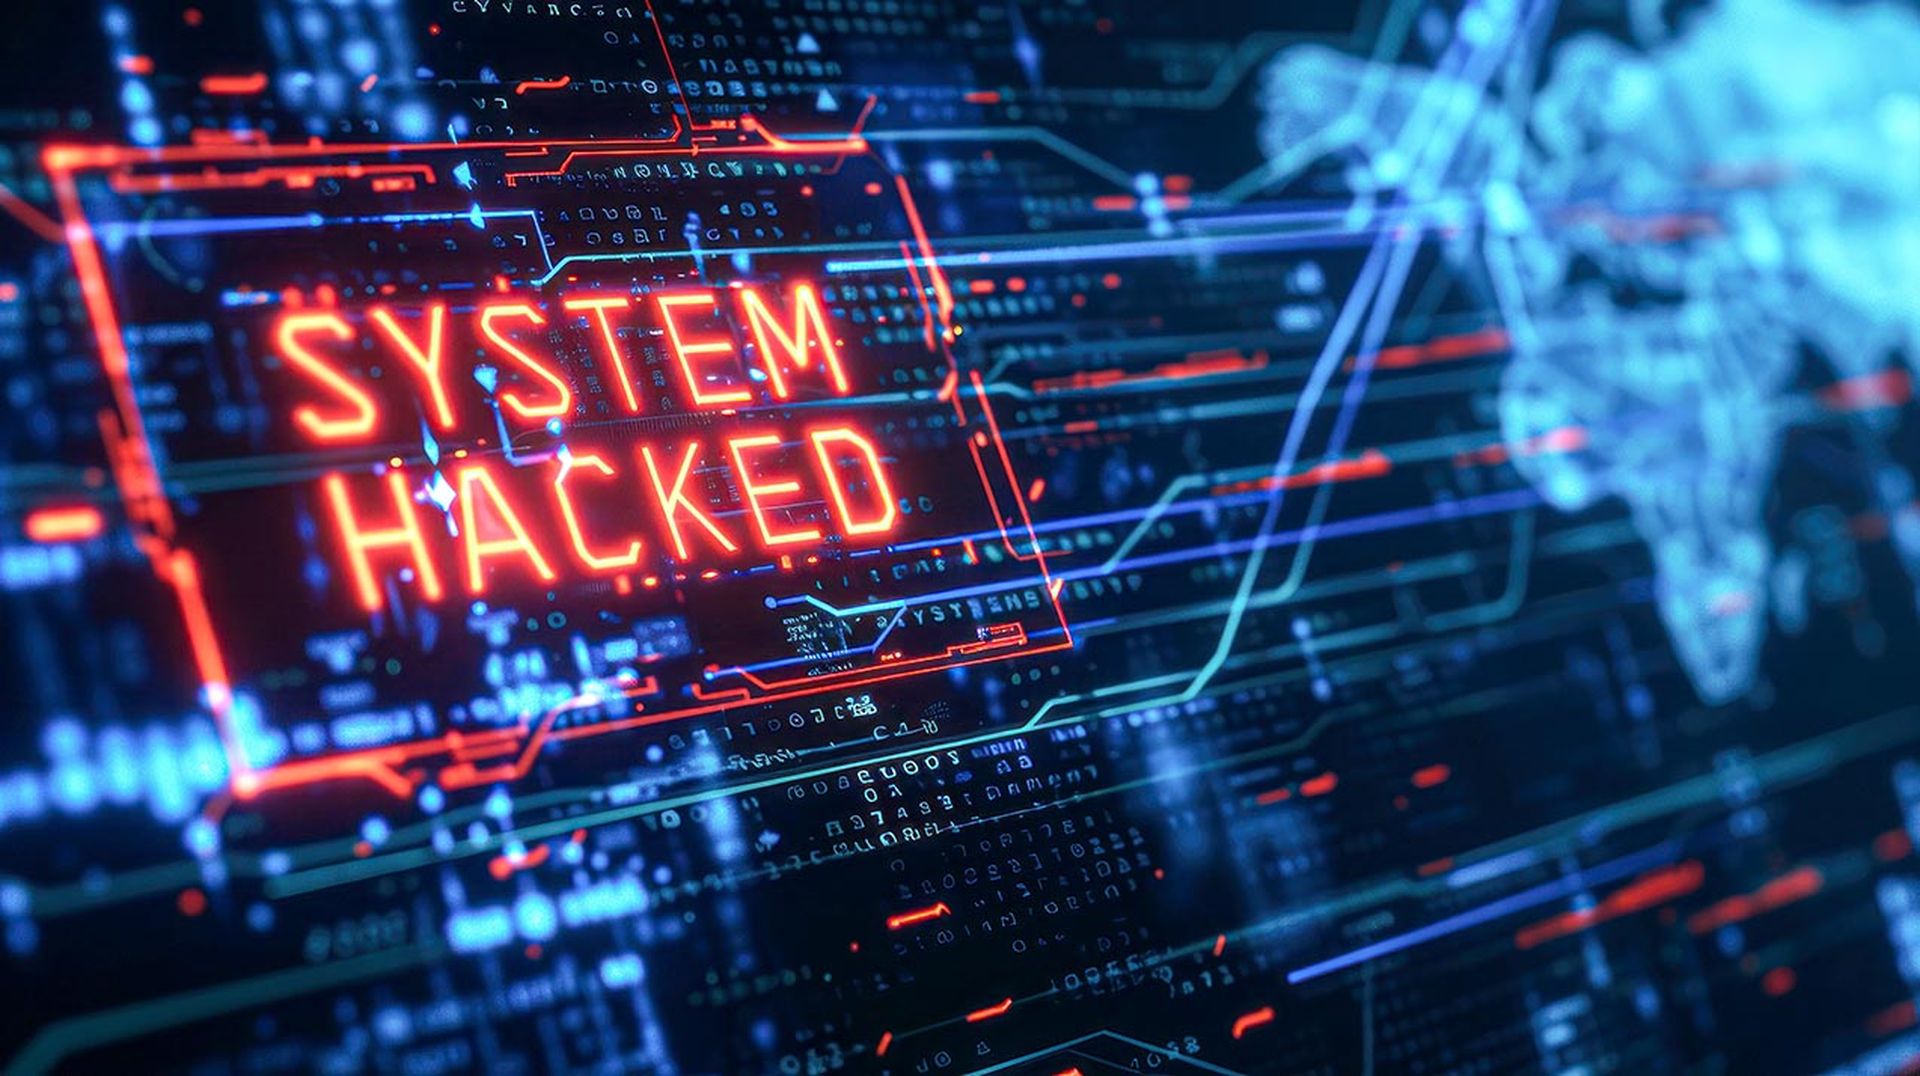 A digital warning sign with "SYSTEM HACKED" in bright red, overlaying a complex background of computer code and digital interfaces, with a deep blue and black color scheme, creating a sense of urgency and alarm.